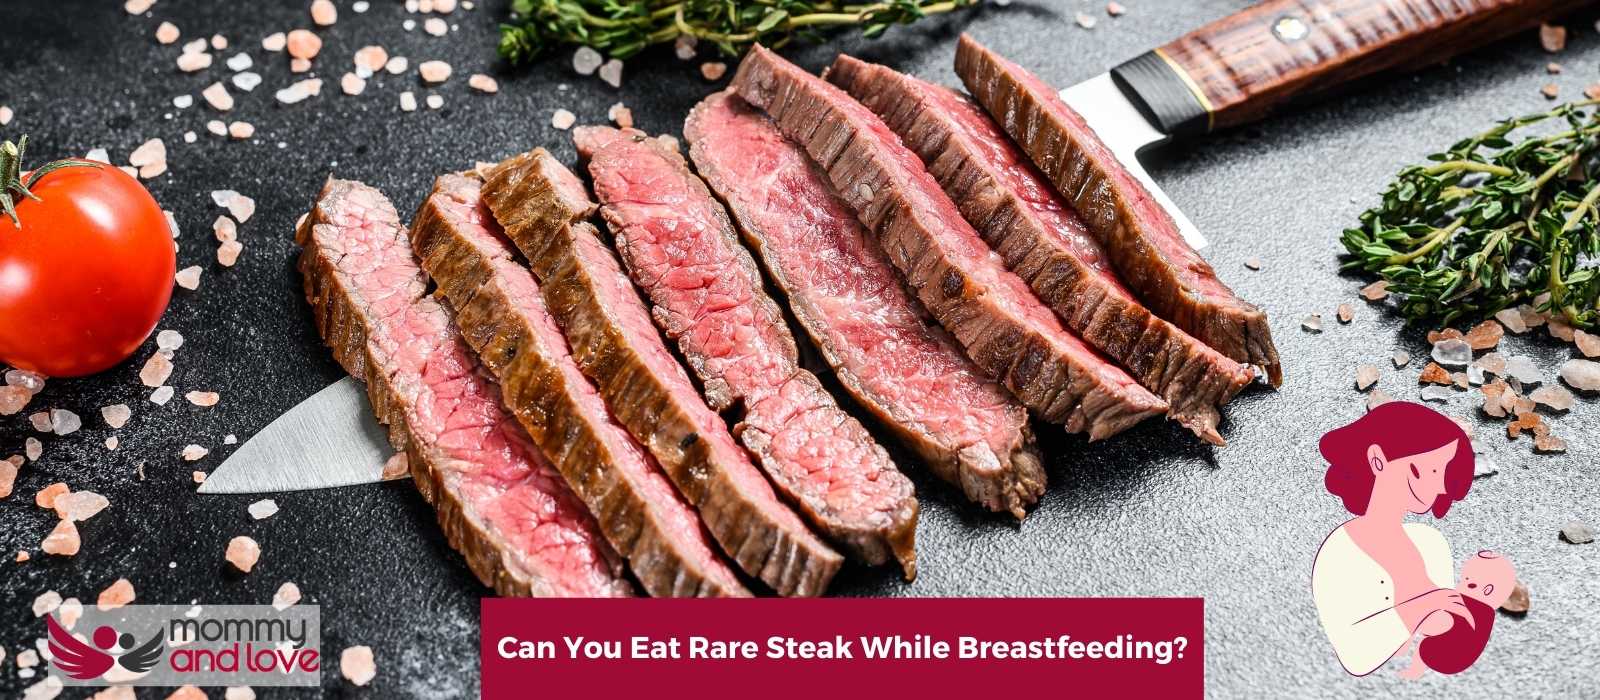 Can You Eat Rare Steak While Breastfeeding